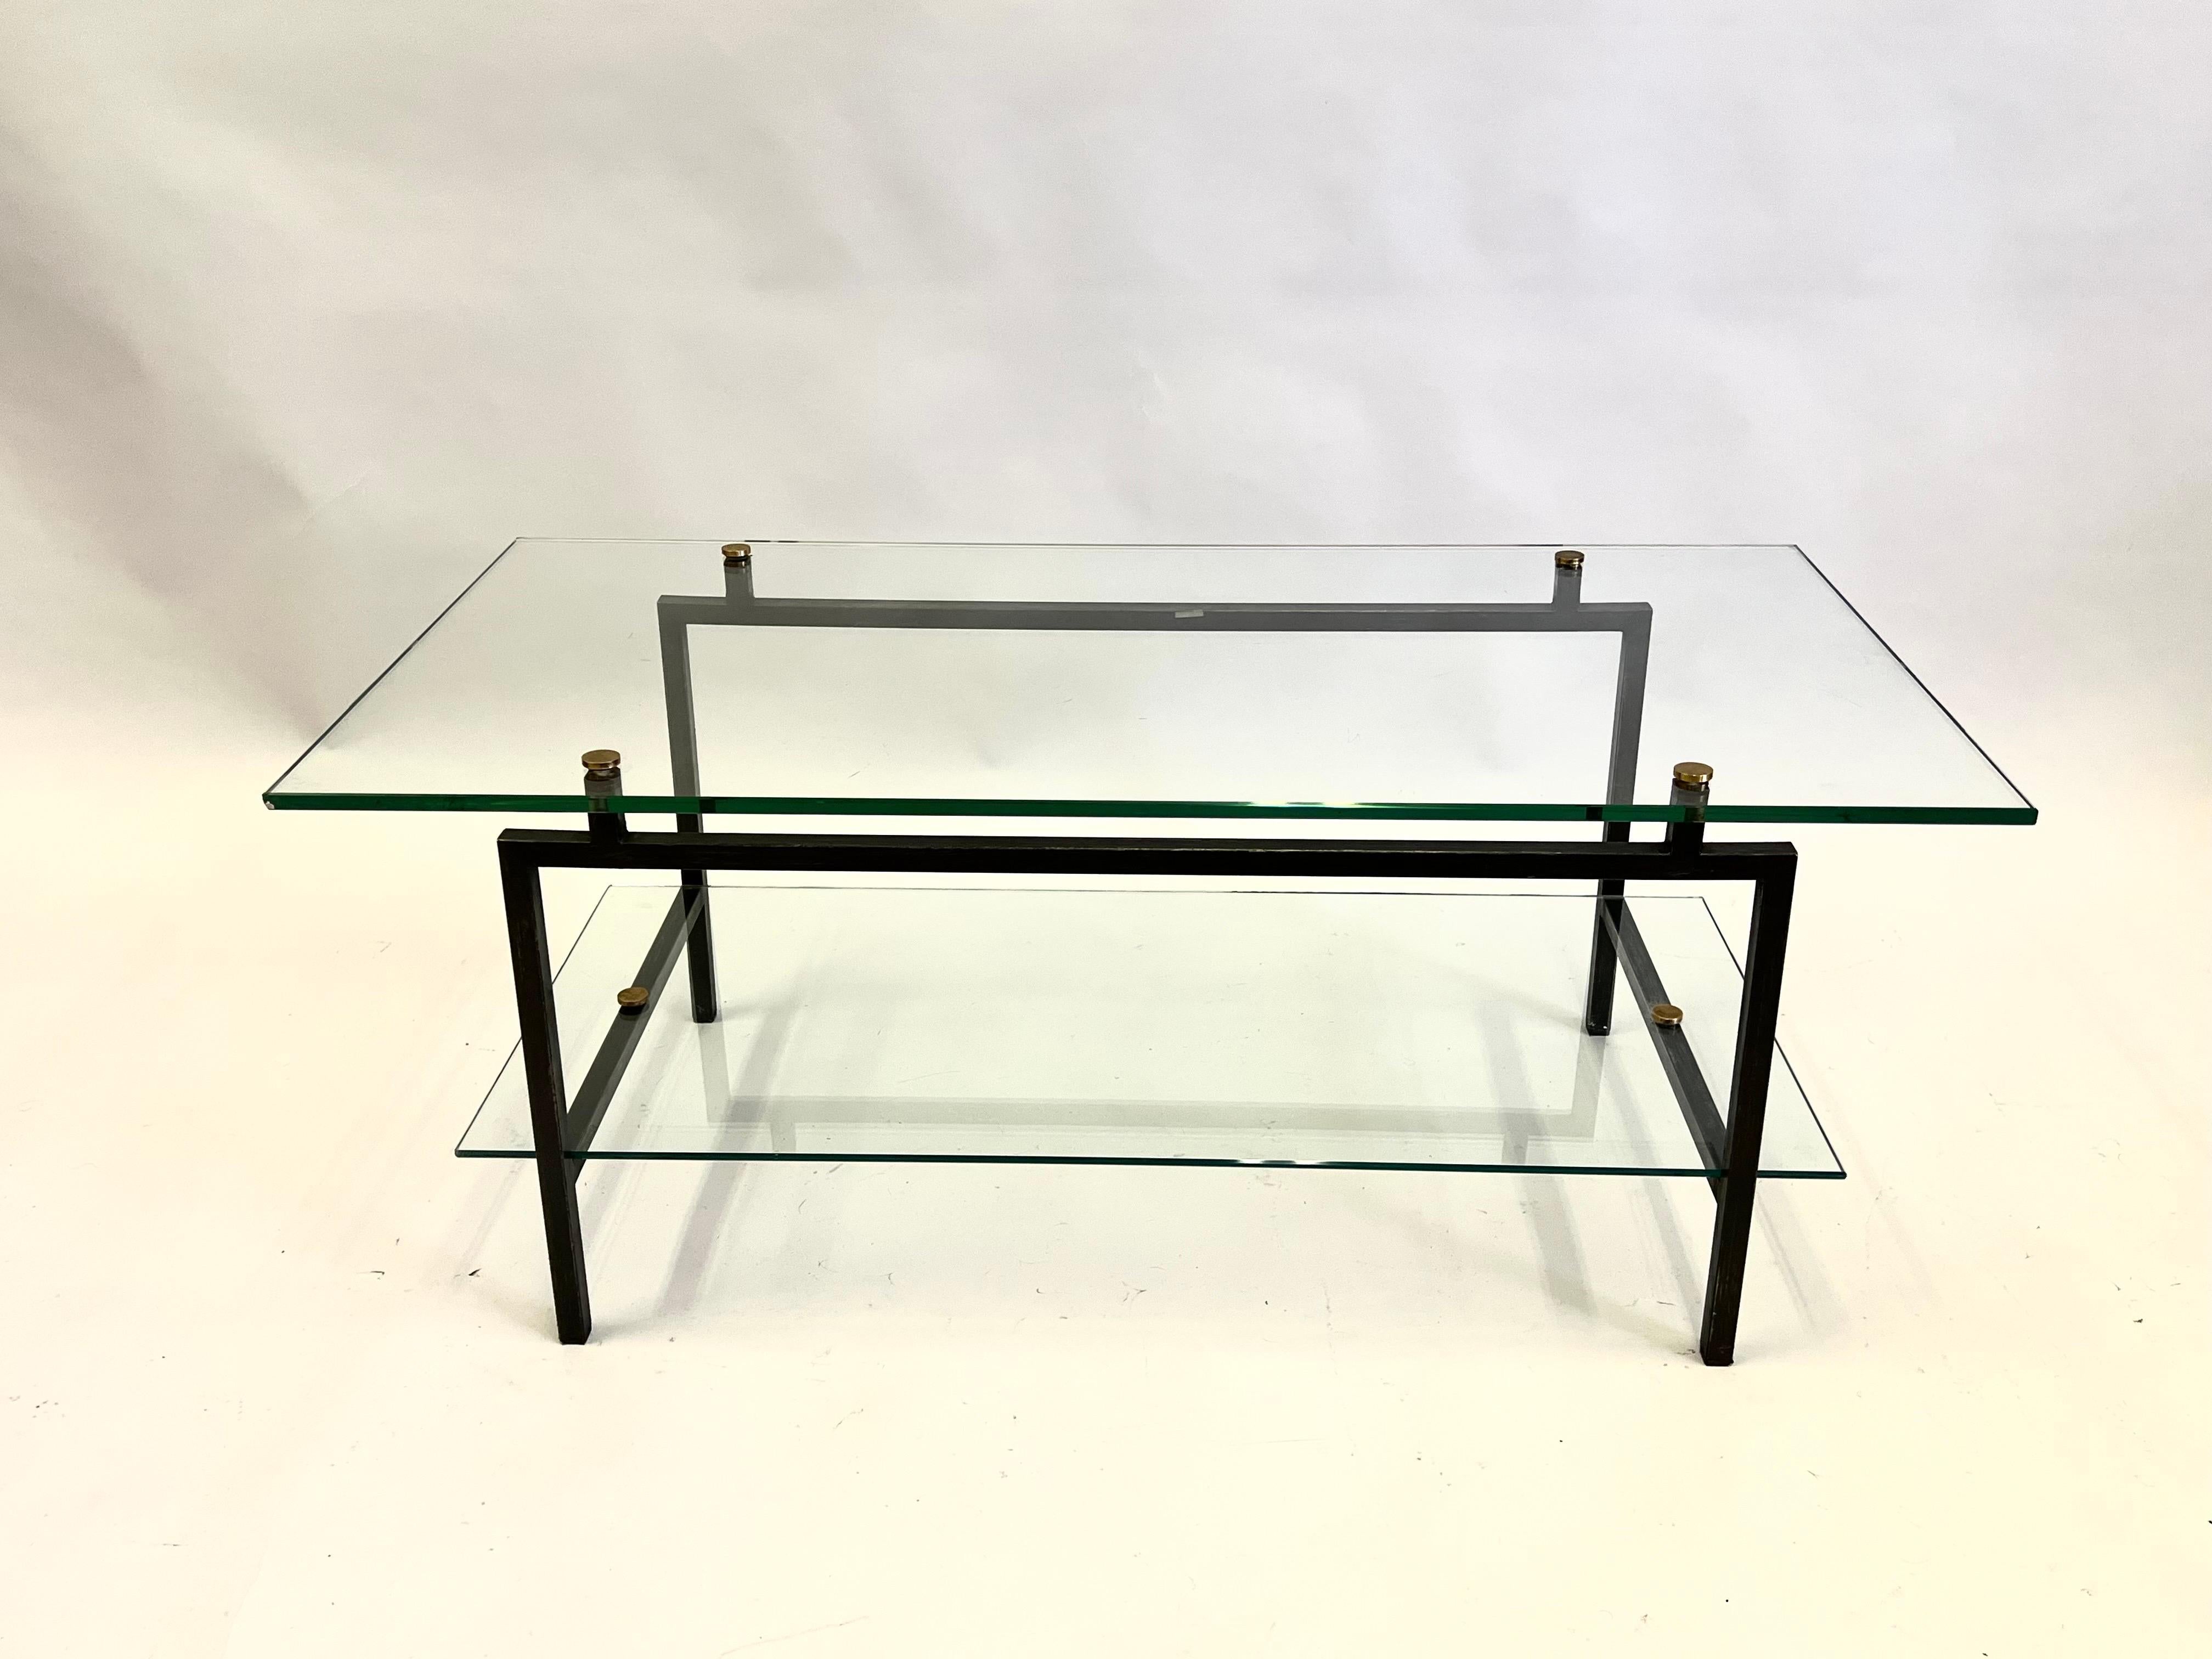 An elegant and pure Modernist Statement, a rare French Mid-Century Modern double tier coffee table in black enameled steel and glass with brass details by Pierre Guariche, circa 1950-1960. 

This original double tiered cocktail table features